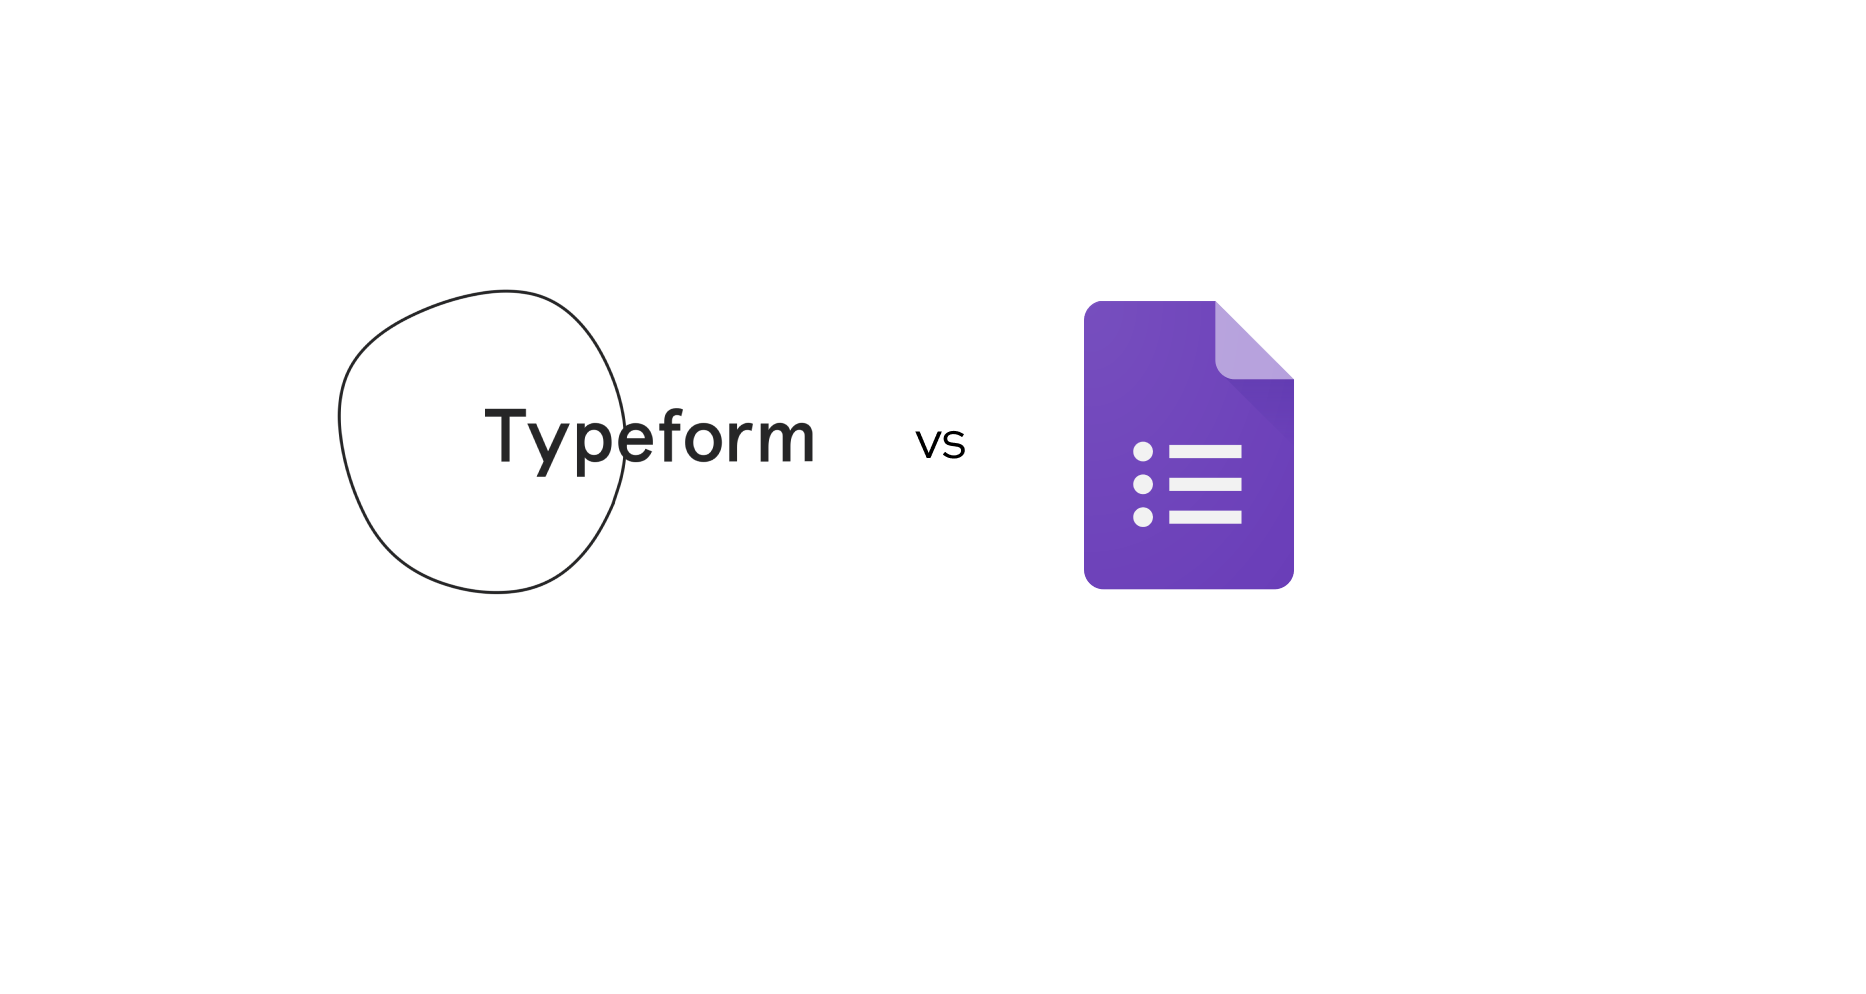 Embed forms from Typeform